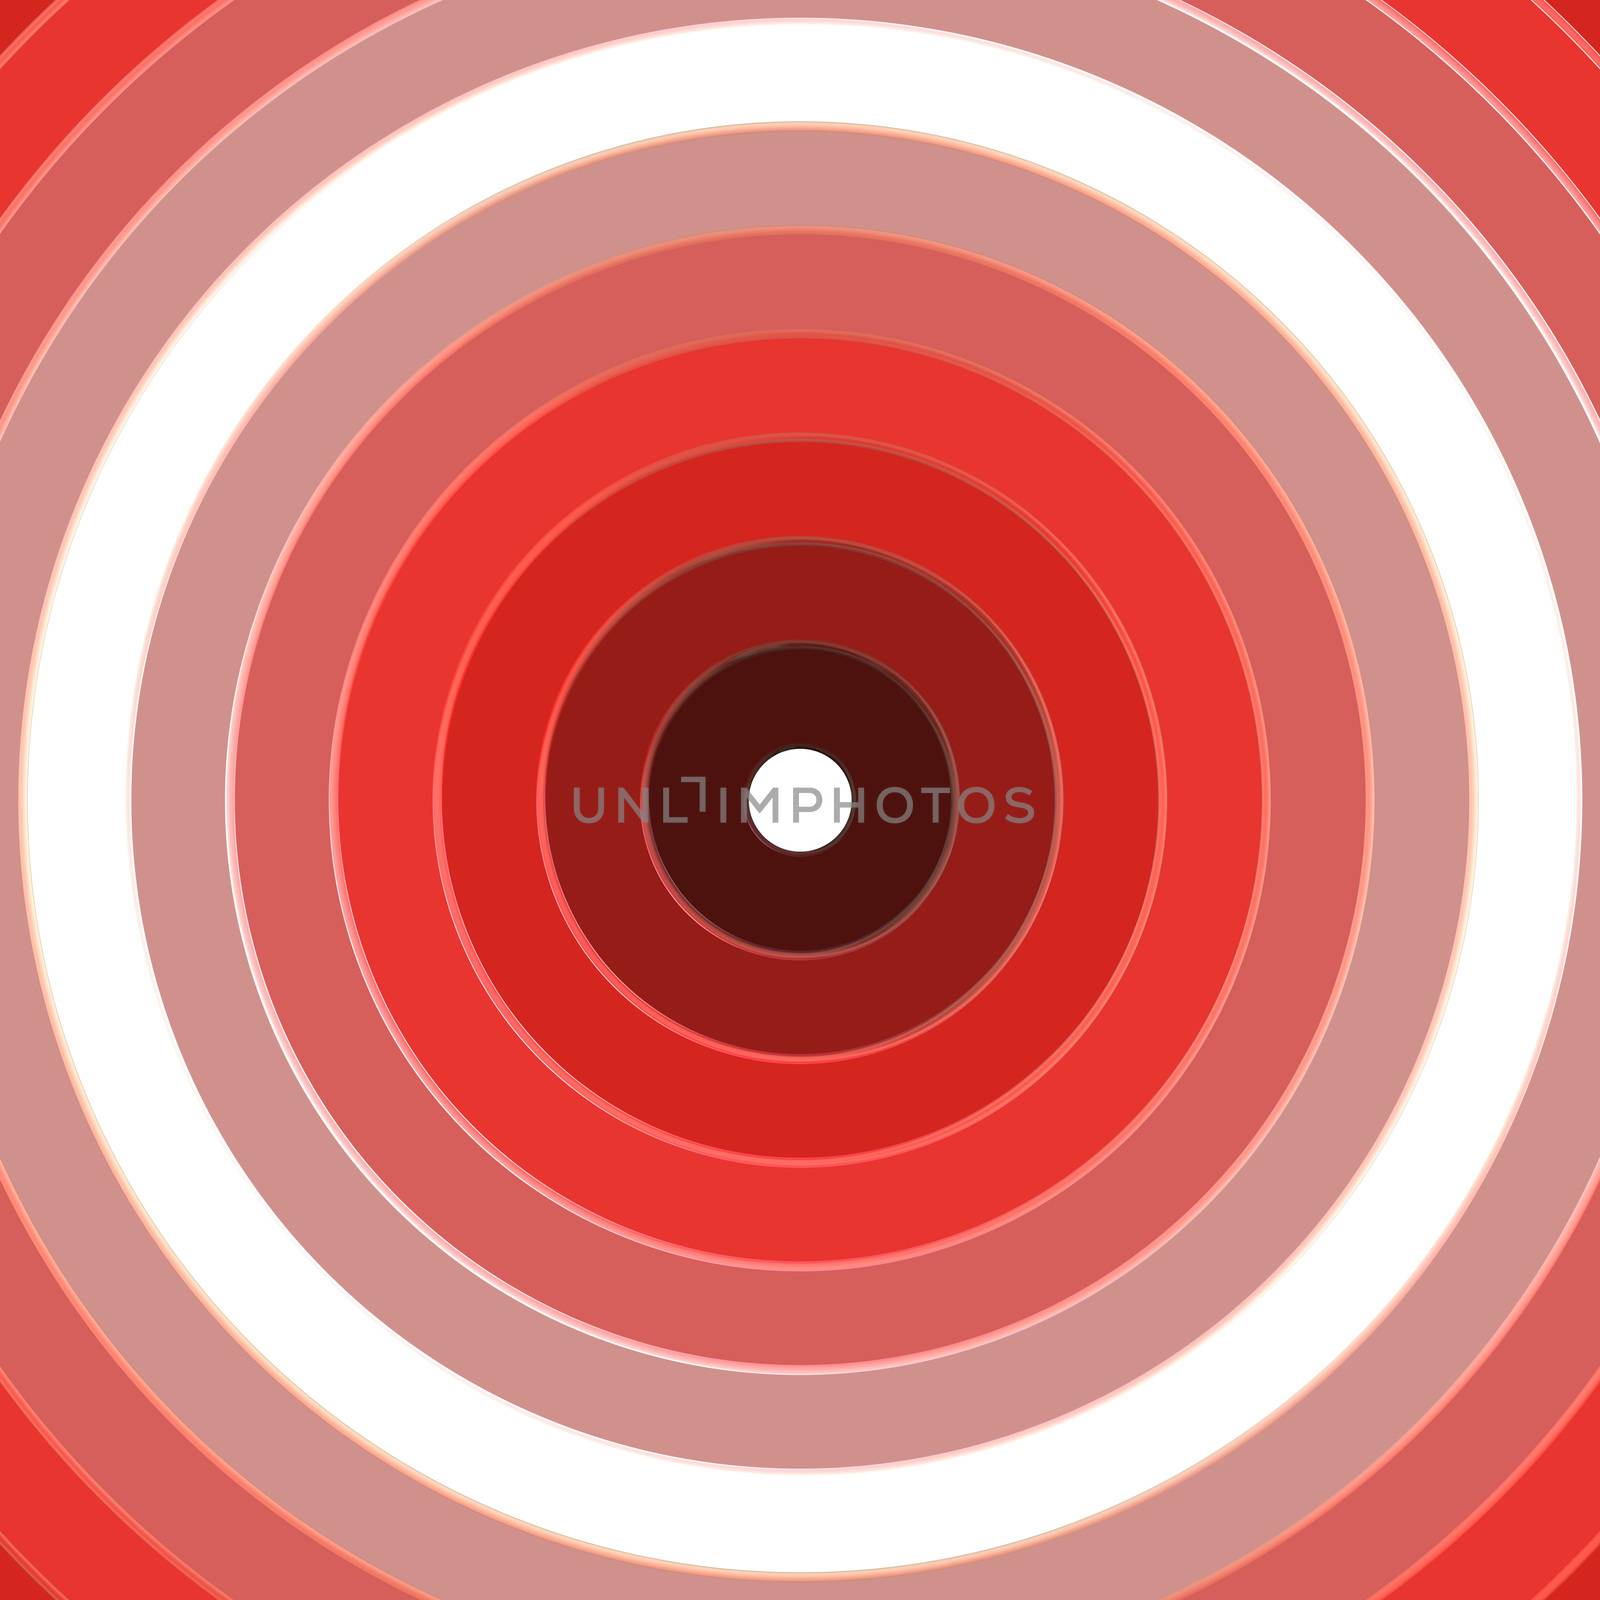 Red and white circular target rings illustration or background